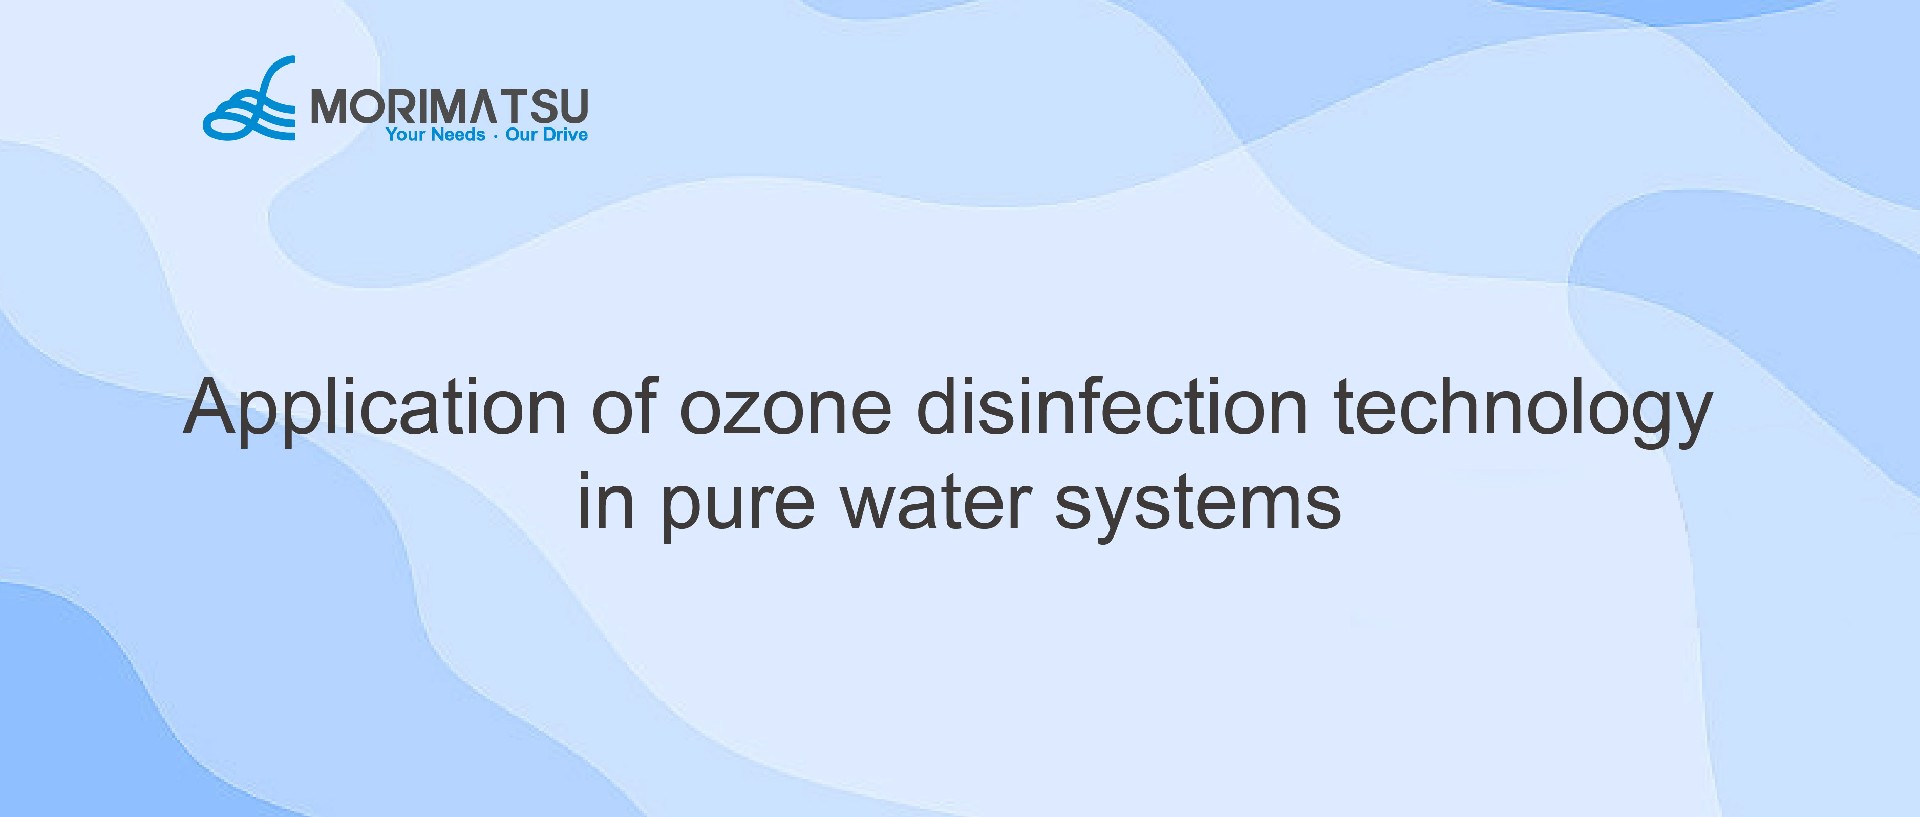 Application of ozone disinfection technology in pure water systems